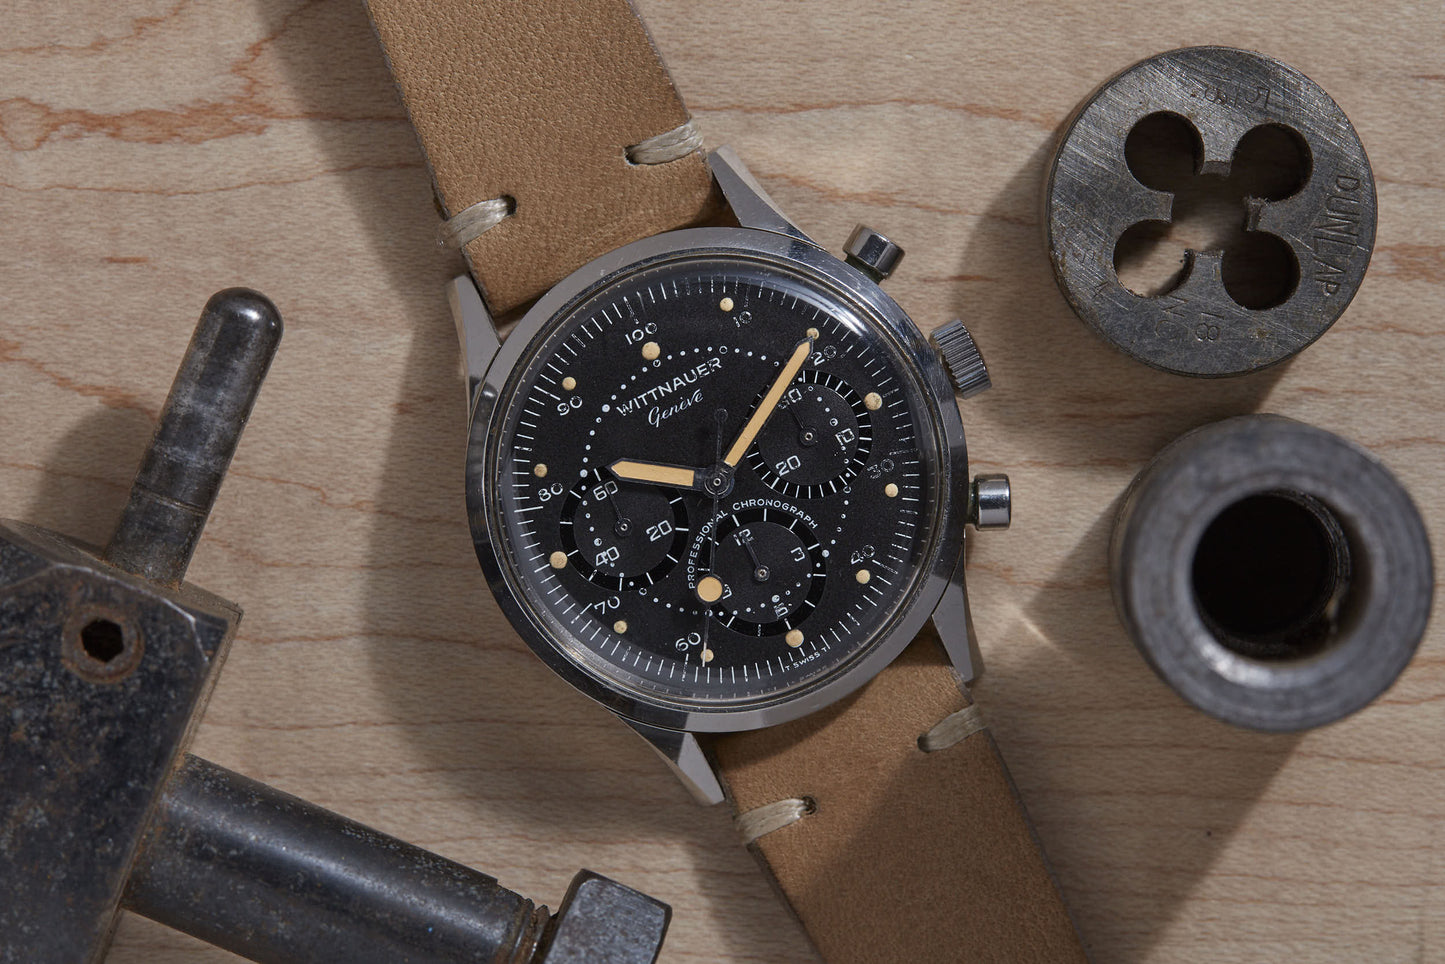 Wittnauer Reference 242T Chronograph